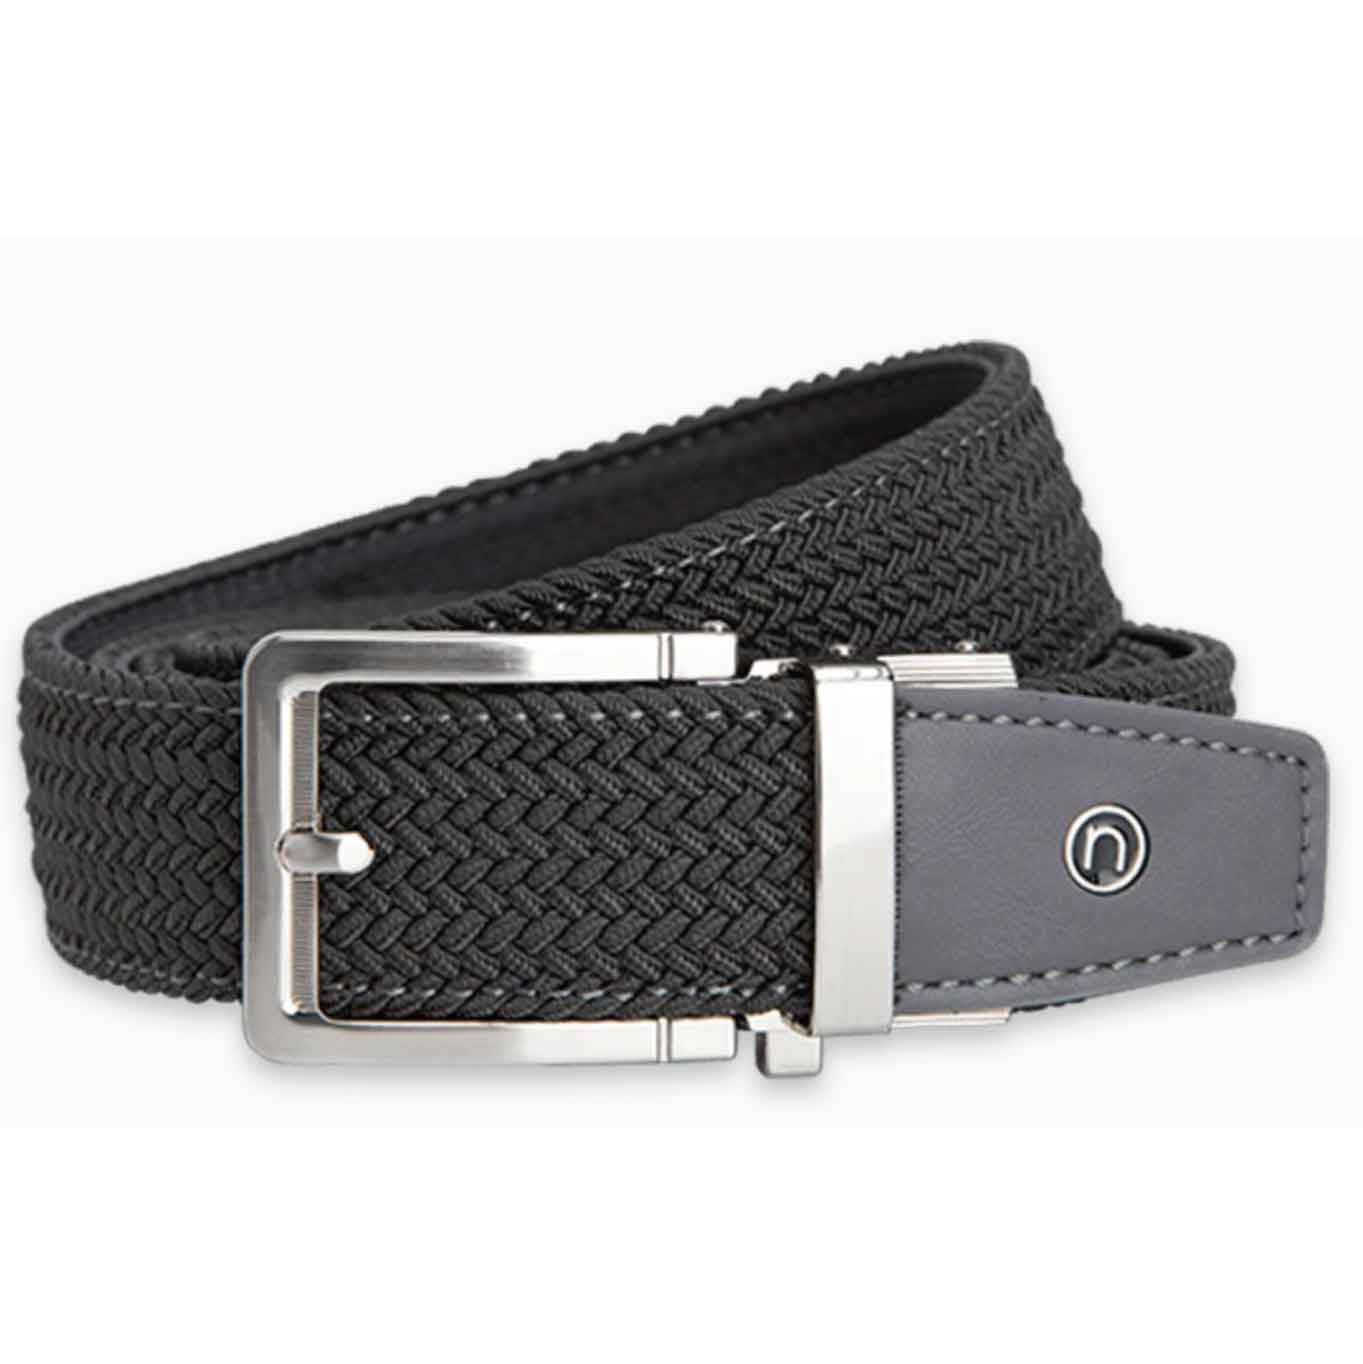 Best golf belts 2023: Men's golf belts, leather and braided